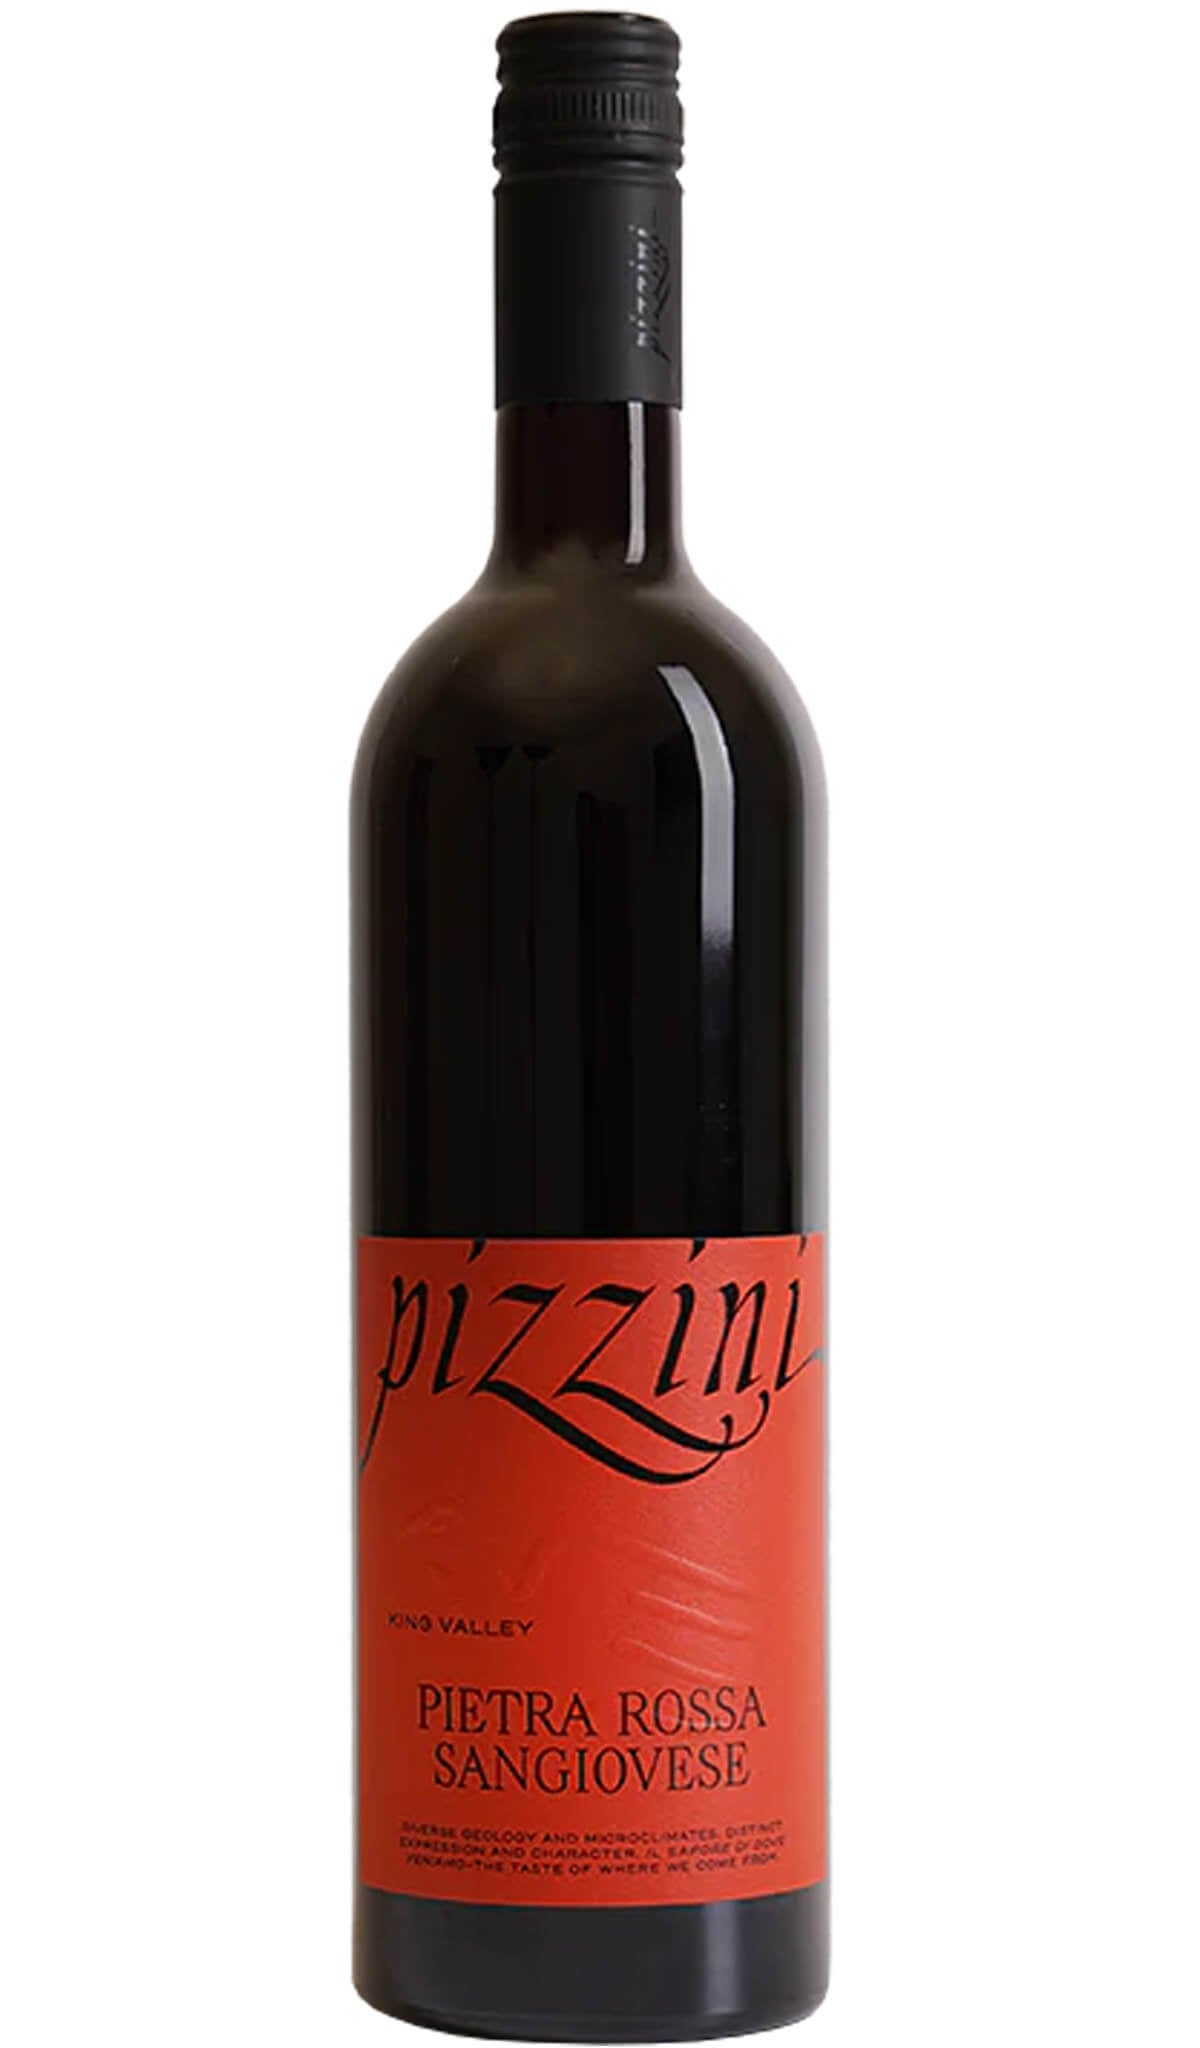 Find out more or buy Pizzini Pietra Rossa Sangiovese 2022 (King Valley) online at Wine Sellers Direct - Australia’s independent liquor specialists.